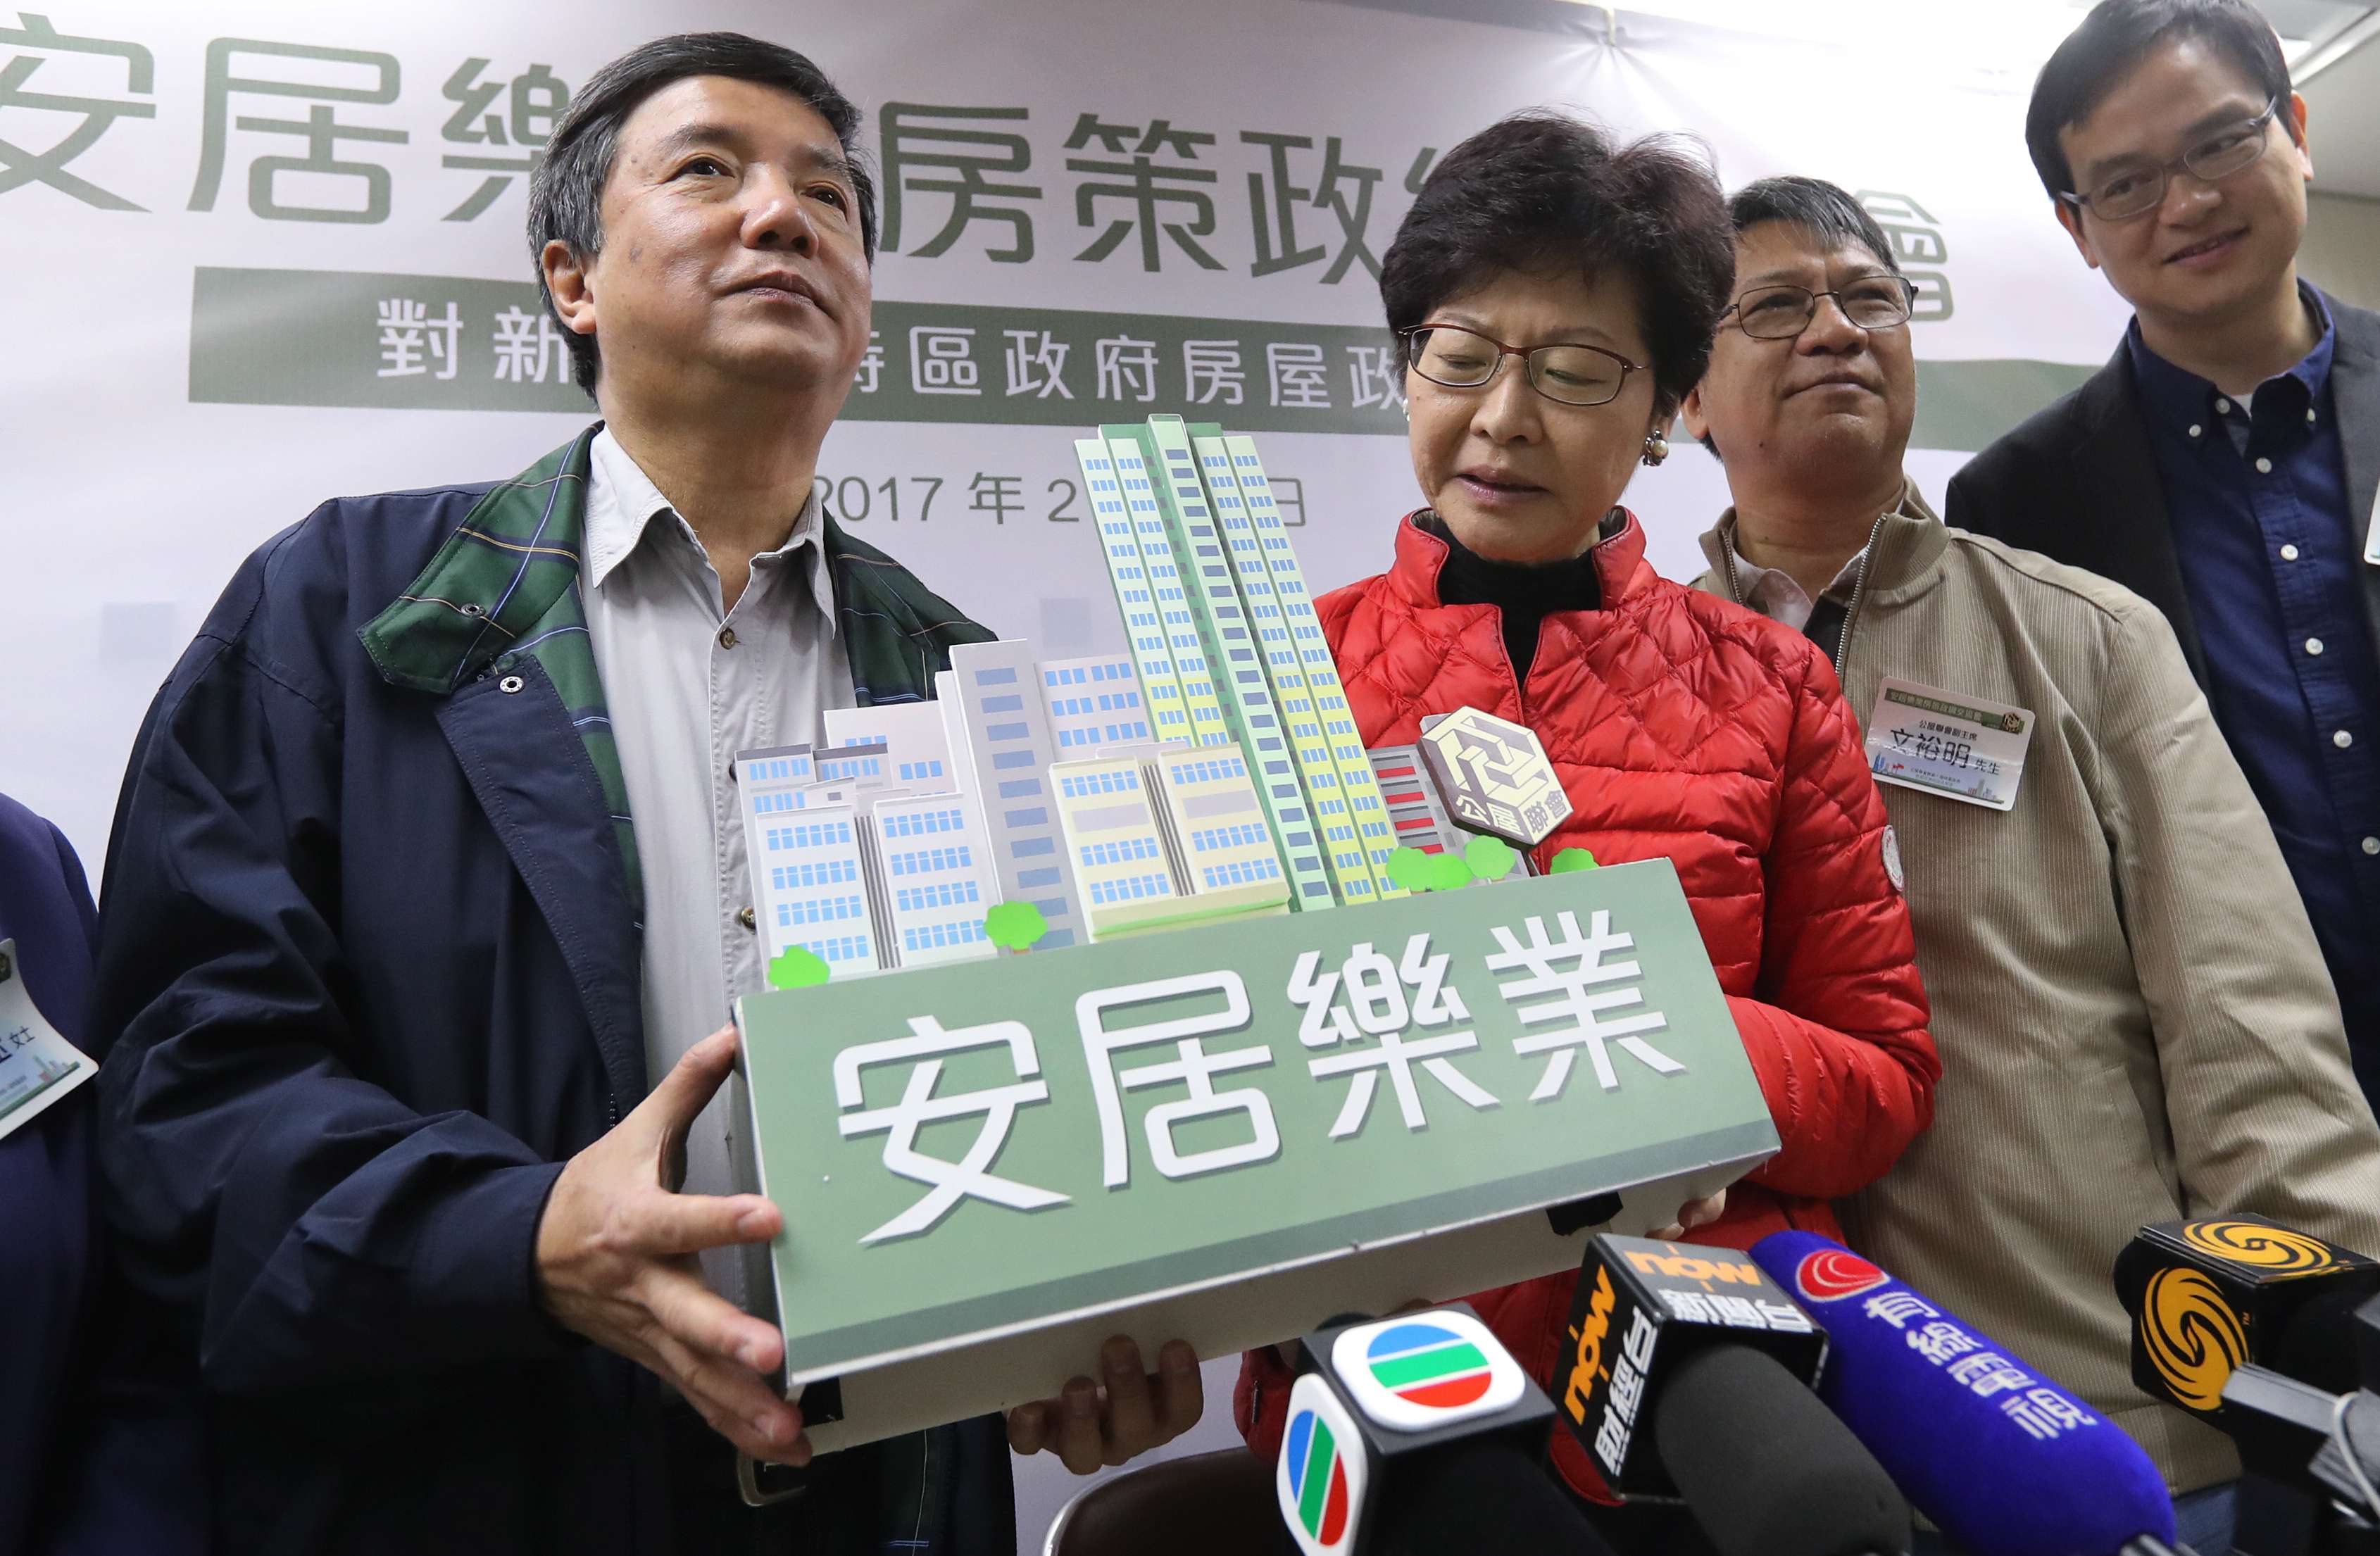 Then chief executive hopeful Carrie Lam with Wong Kwun (left), chairman of the Federation of Public Housing Estates, in Kwun Tong on February 18. In her election platform, Lam pledged to improve access to housing, including for first-time homebuyers in the “sandwich class” who are ineligible for public housing. Photo: Edward Wong